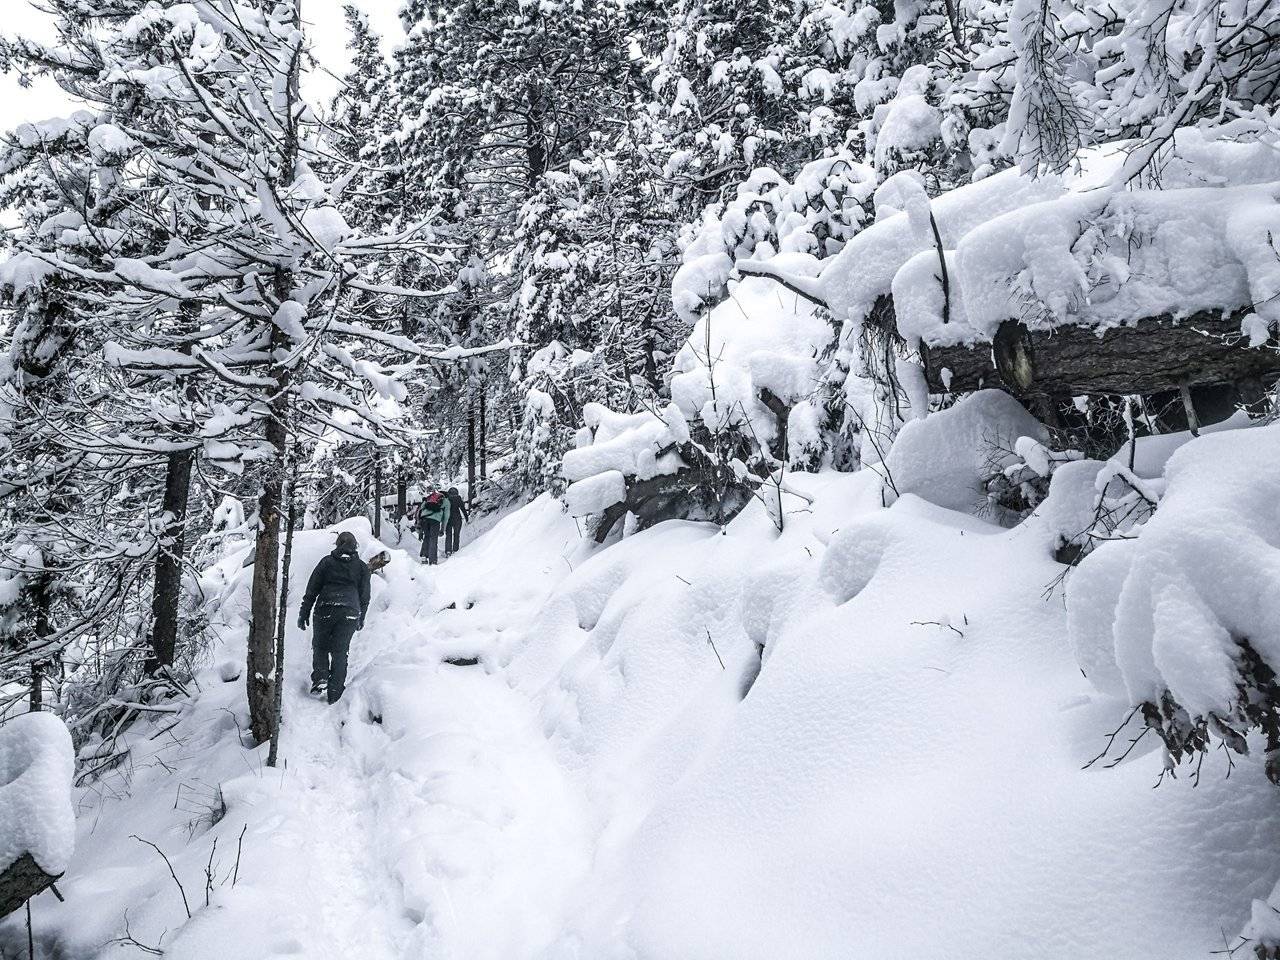   With enough snow, even an easiest hike might get difficult and dangerous. Photo by Alis Monte [CC BY-SA 4.0], via Connecting the Dots